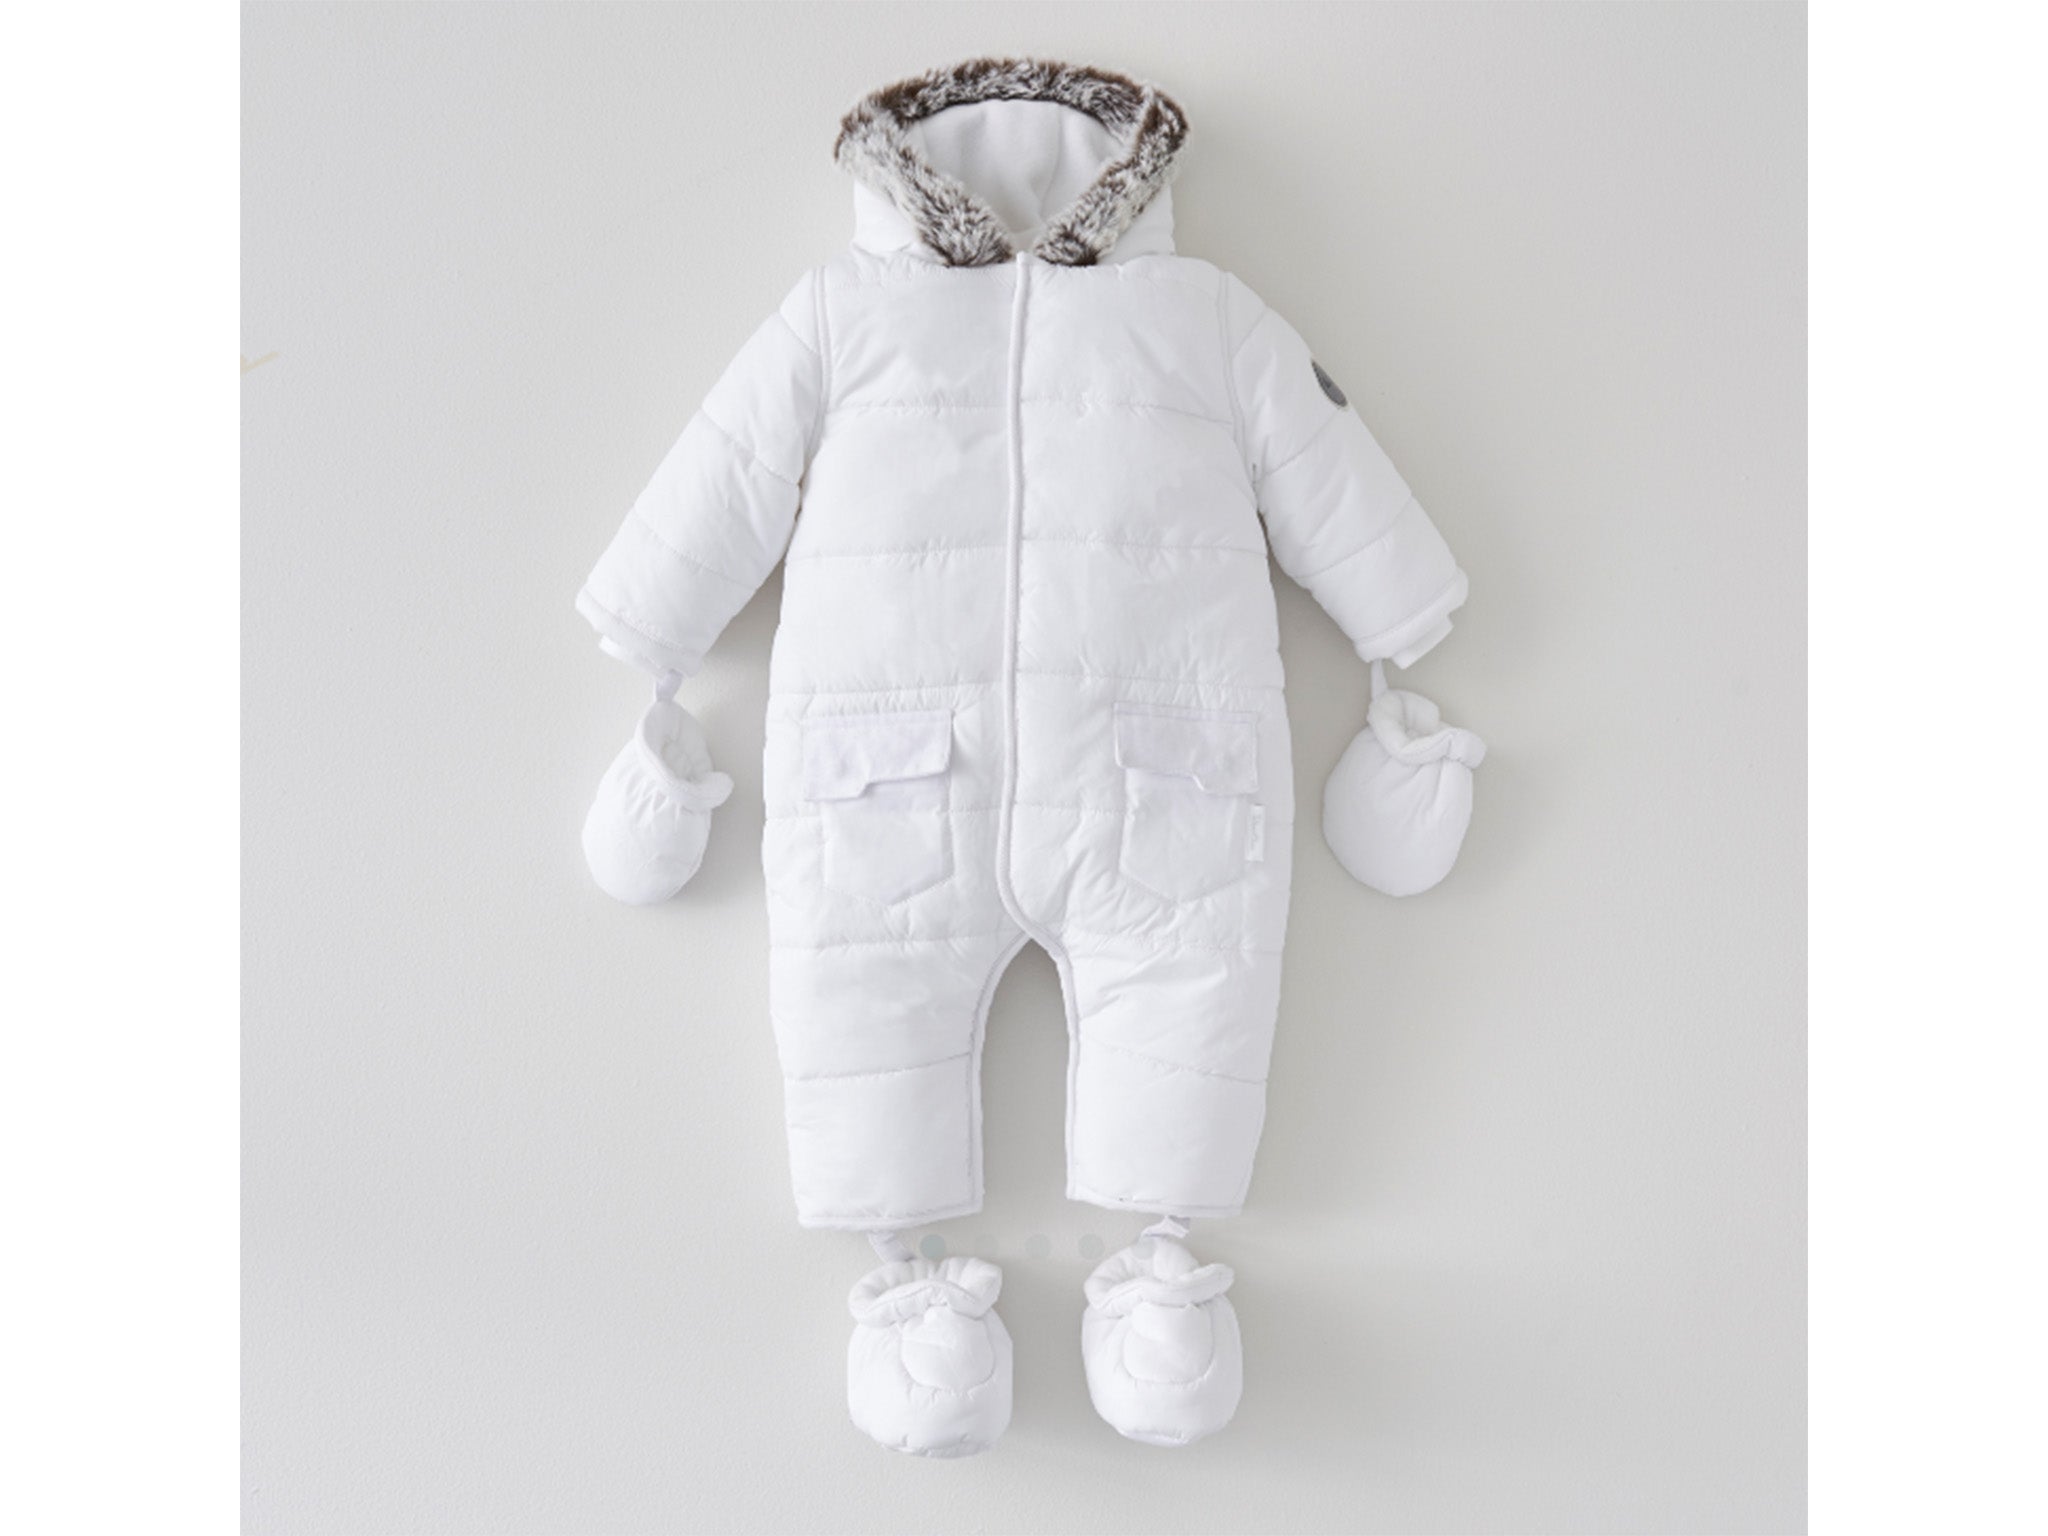 Silver Cross white quilted pram suit